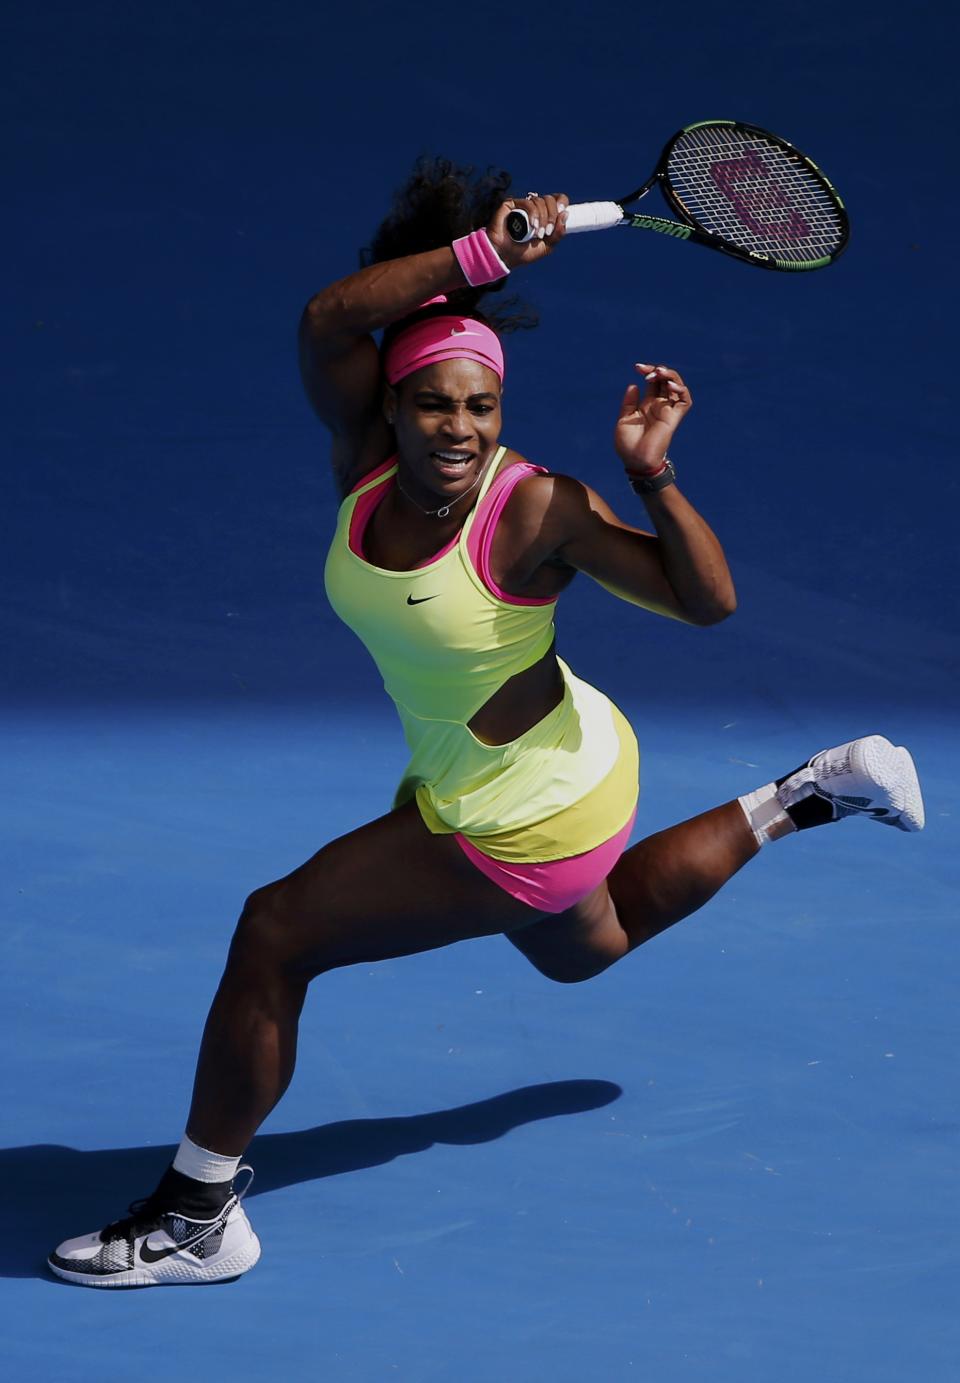 Serena Williams of the U.S. hits a return to compatriot Madison Keys during their women's singles semi-final match at the Australian Open 2015 tennis tournament in Melbourne January 29, 2015. REUTERS/Carlos Barria (AUSTRALIA - Tags: SPORT TENNIS)